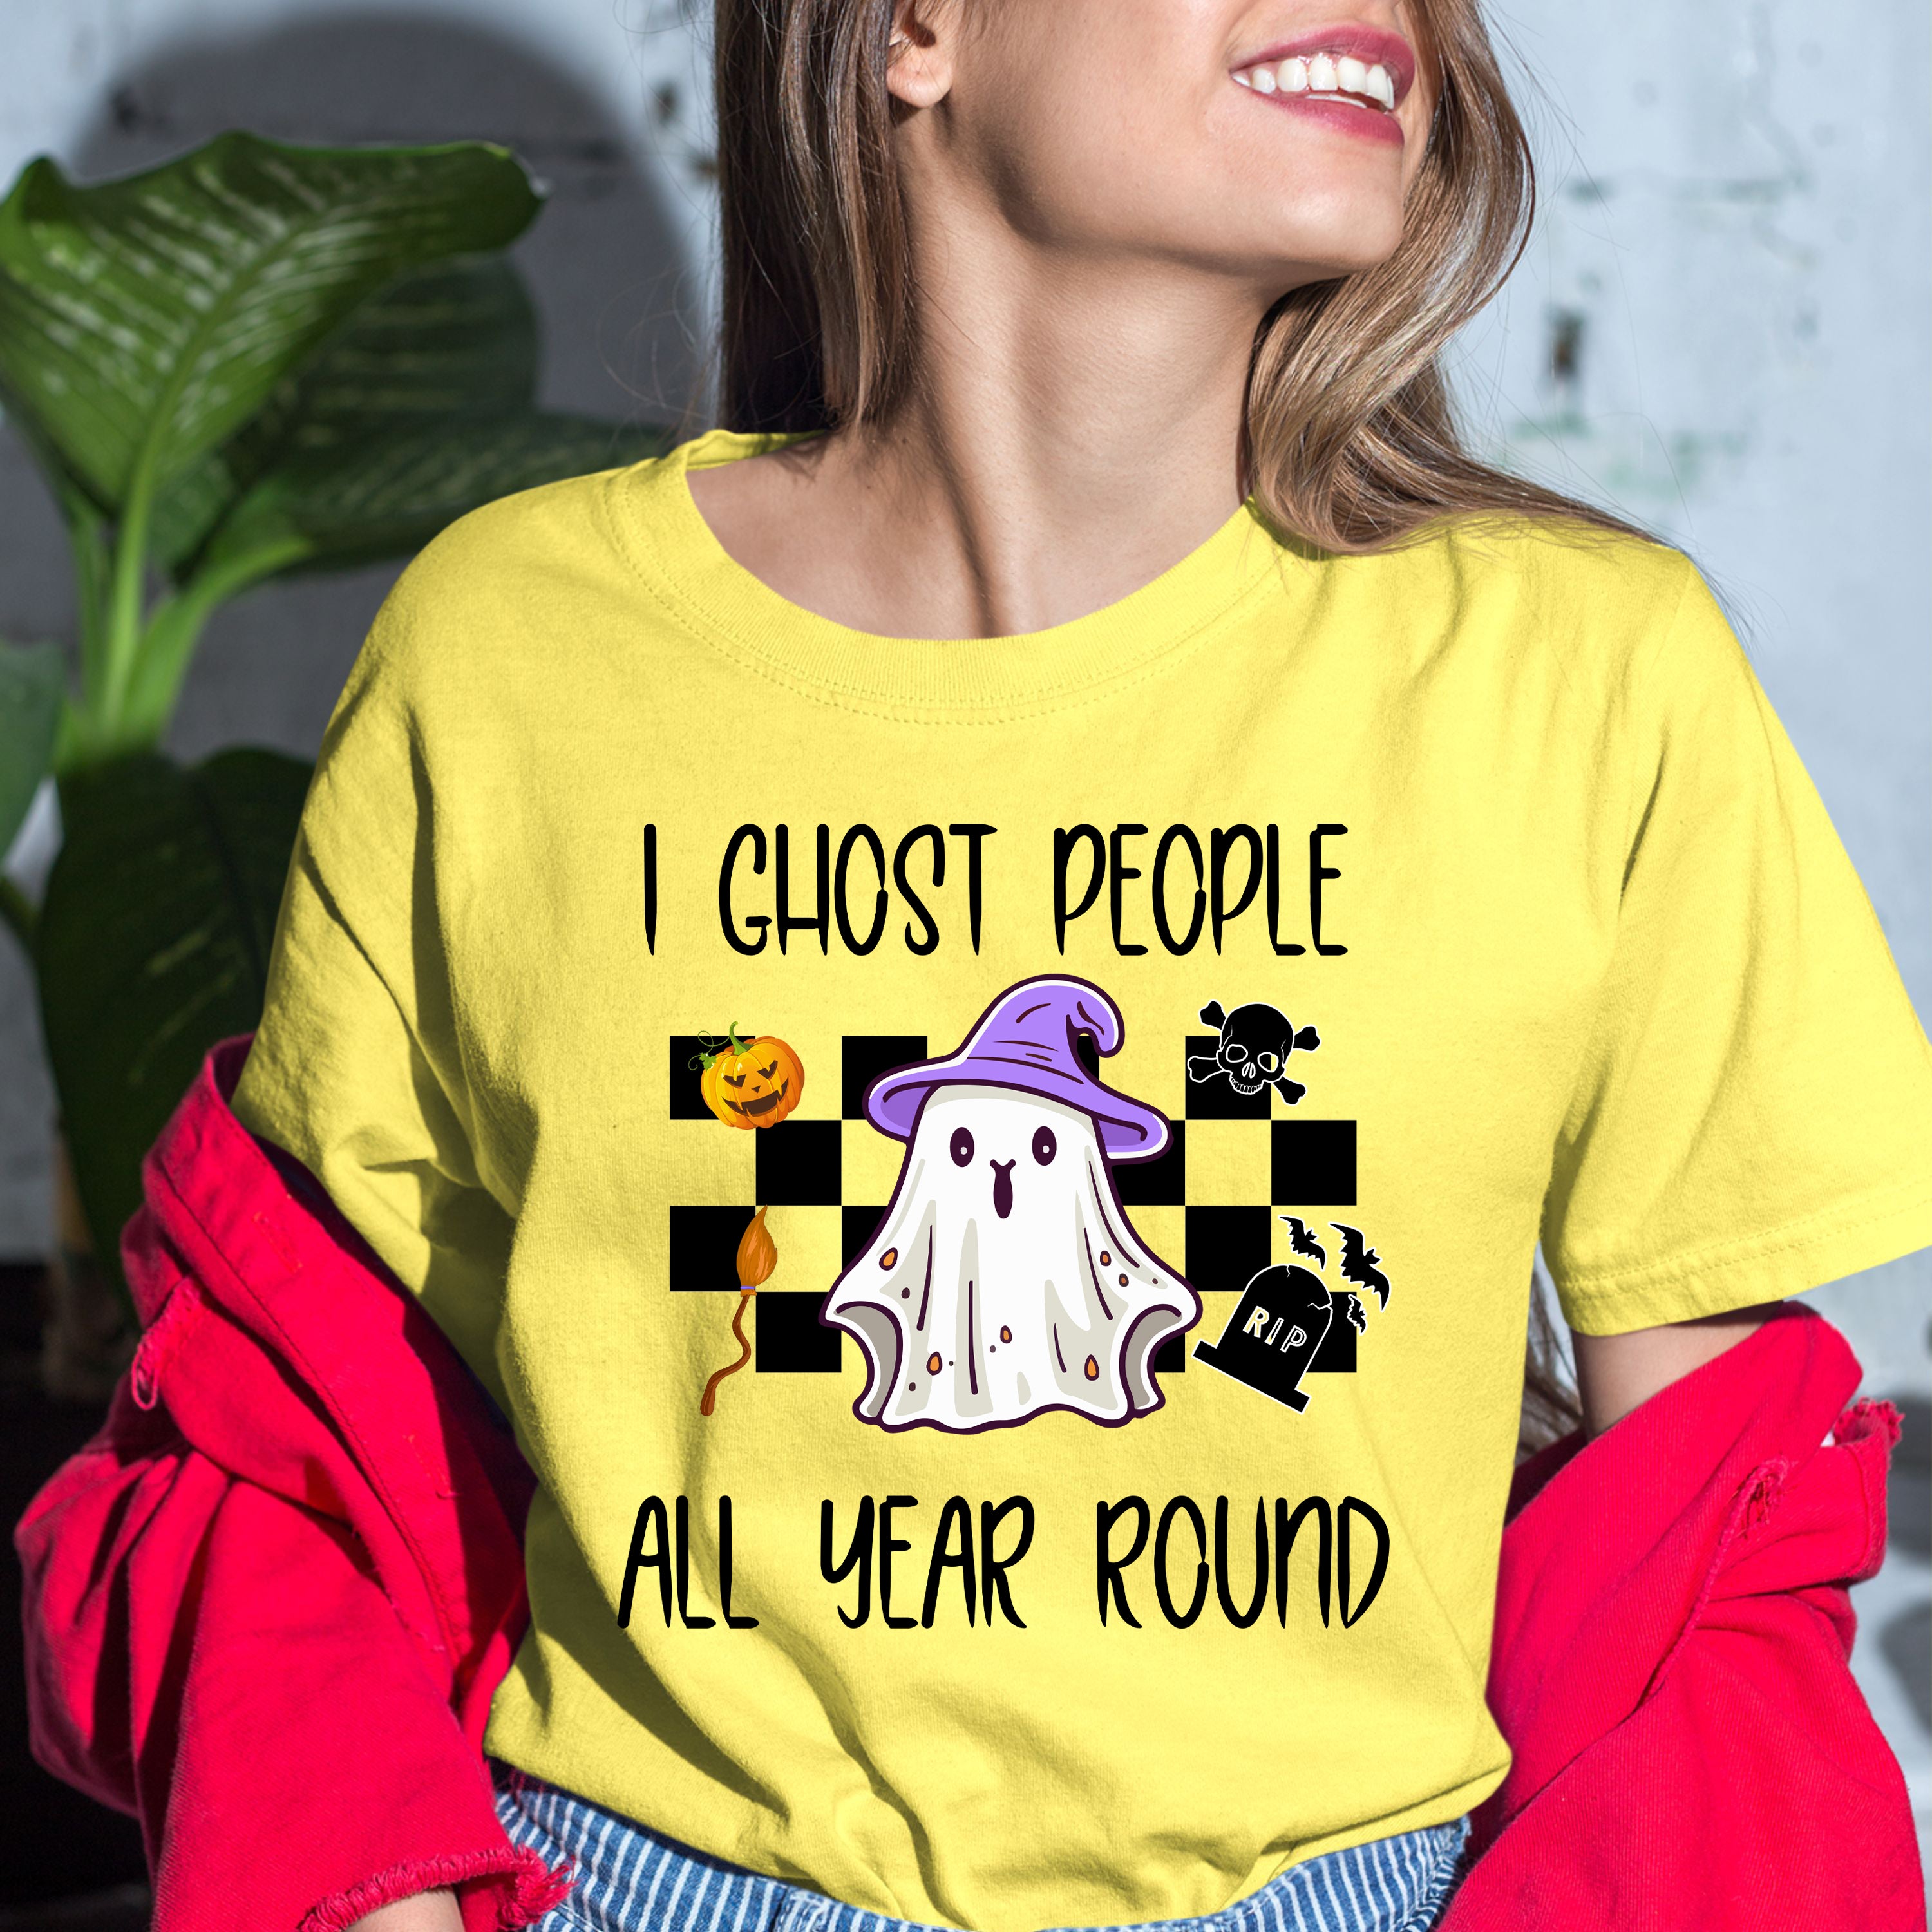 I Ghost People All Year Round - Bella Canvas